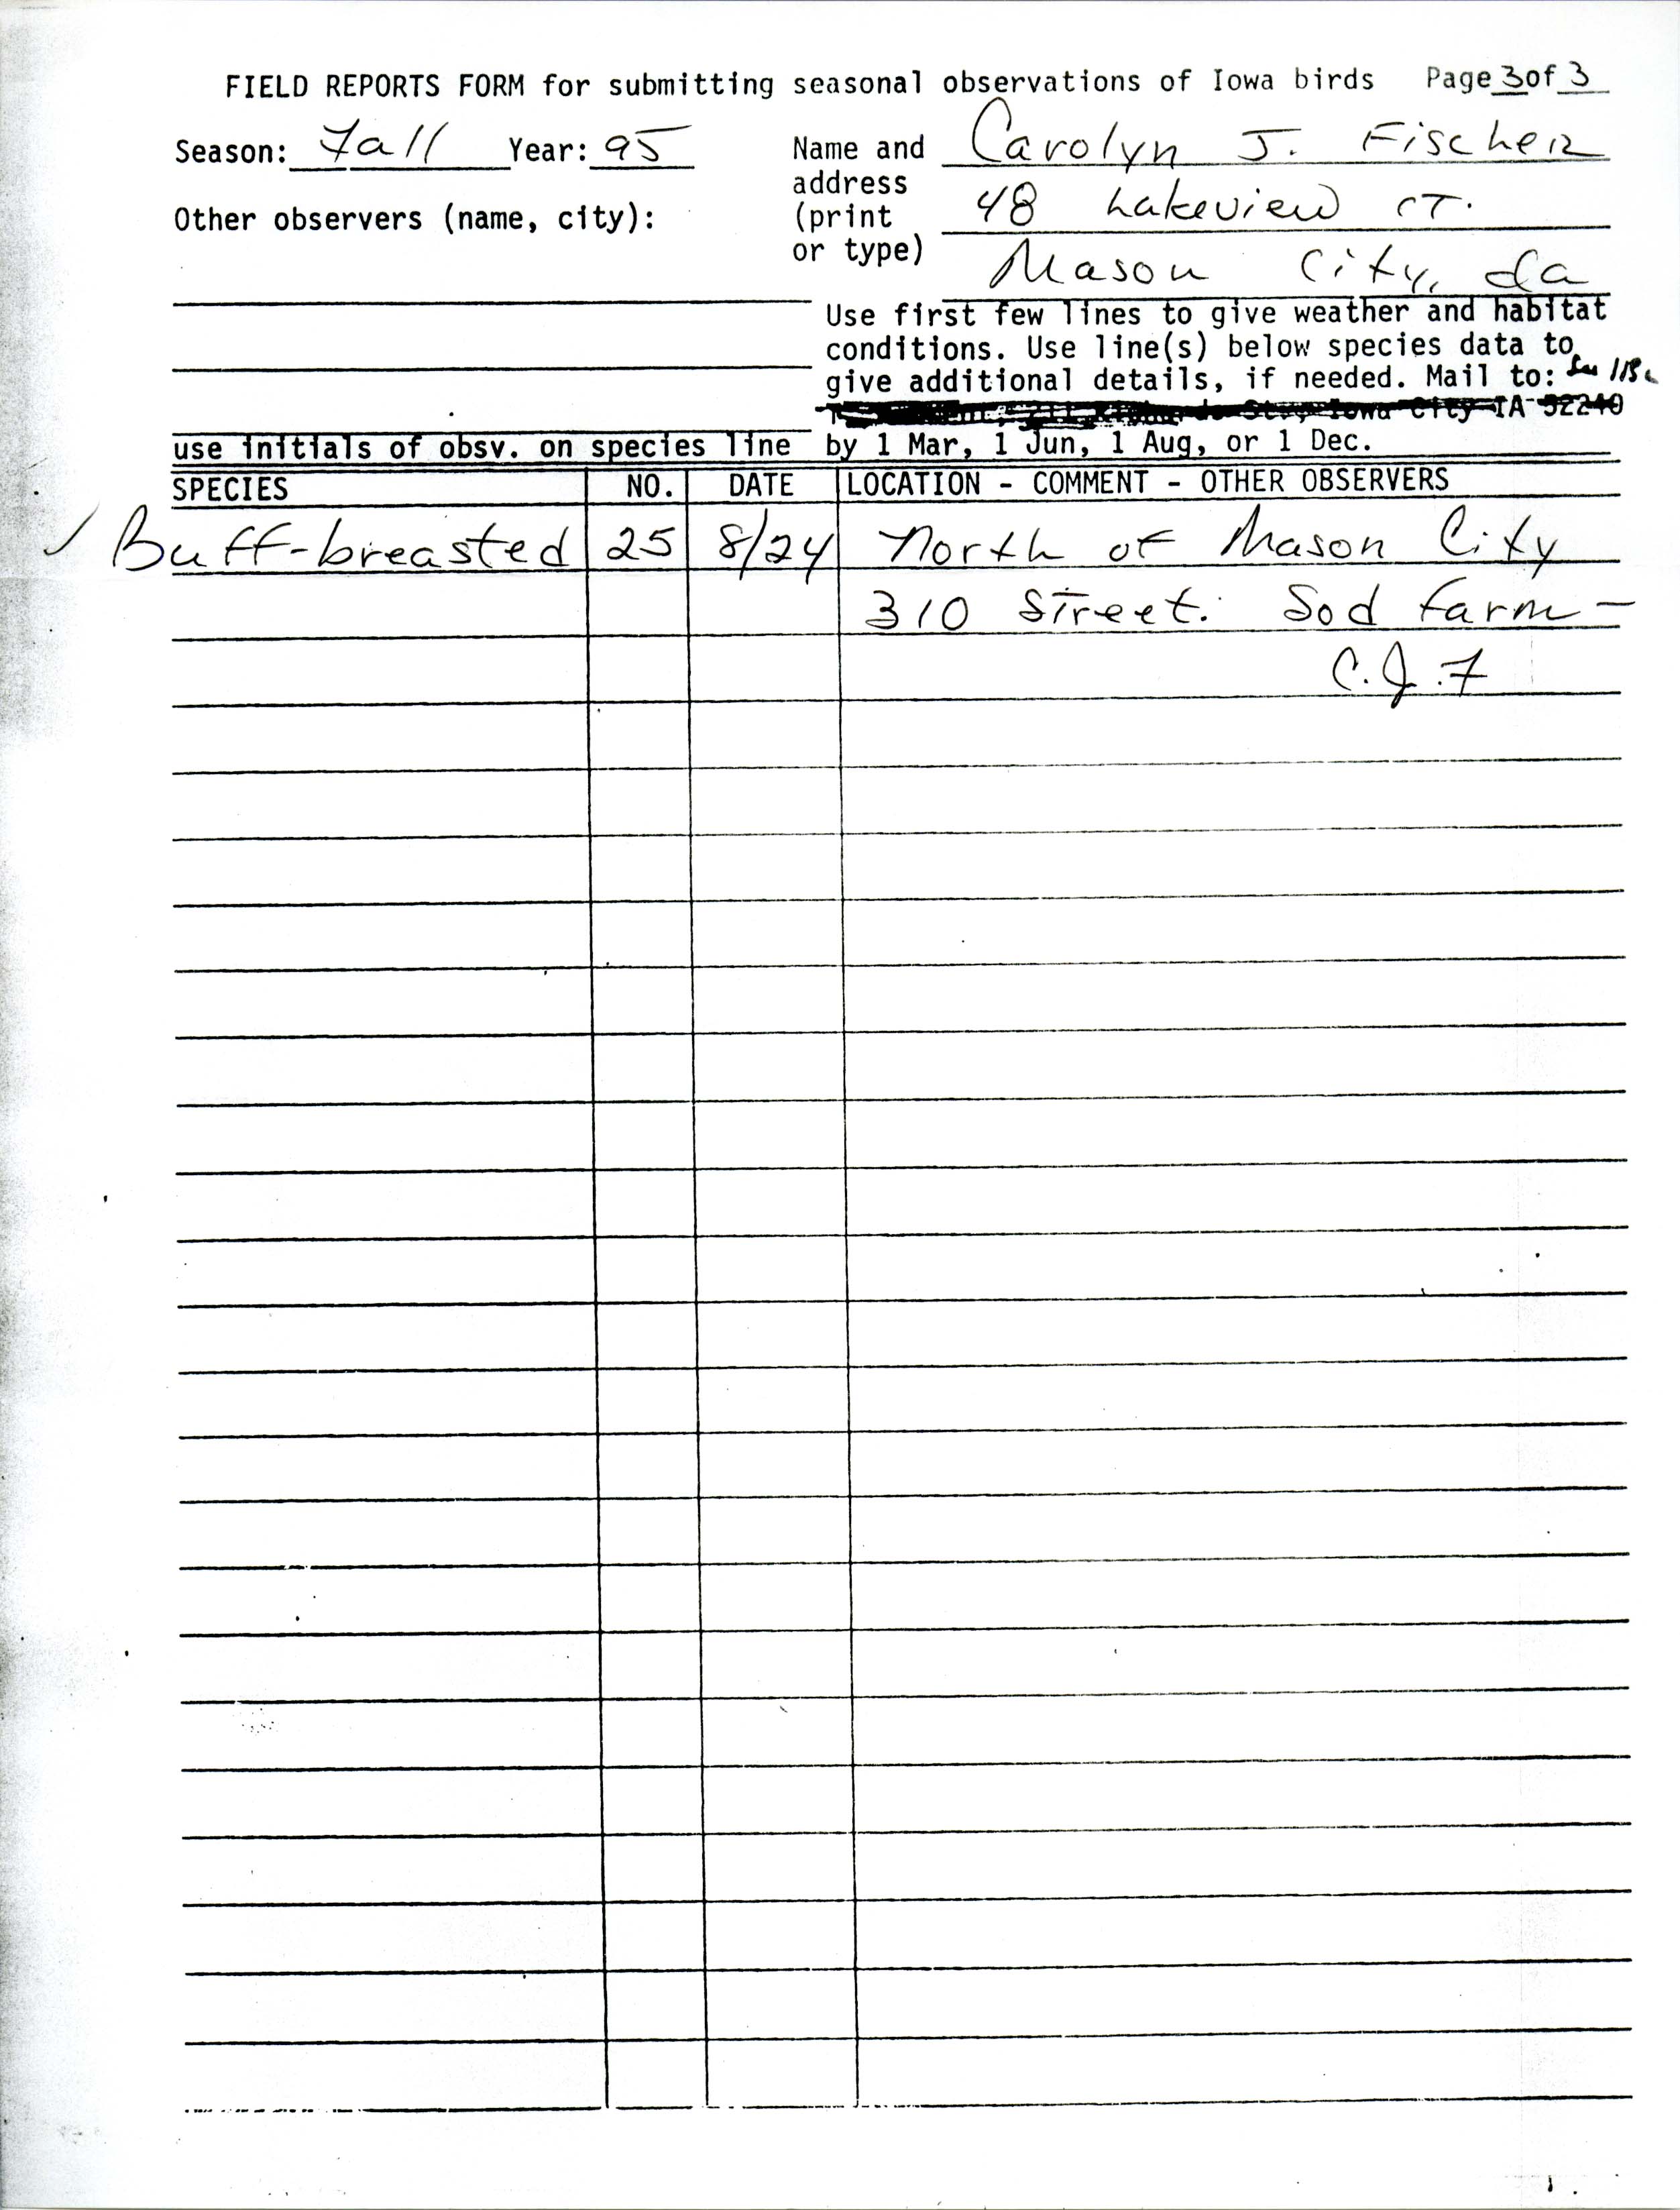 Field reports form for submitting seasonal observations of Iowa birds, Carolyn J. Fischer, fall 1995